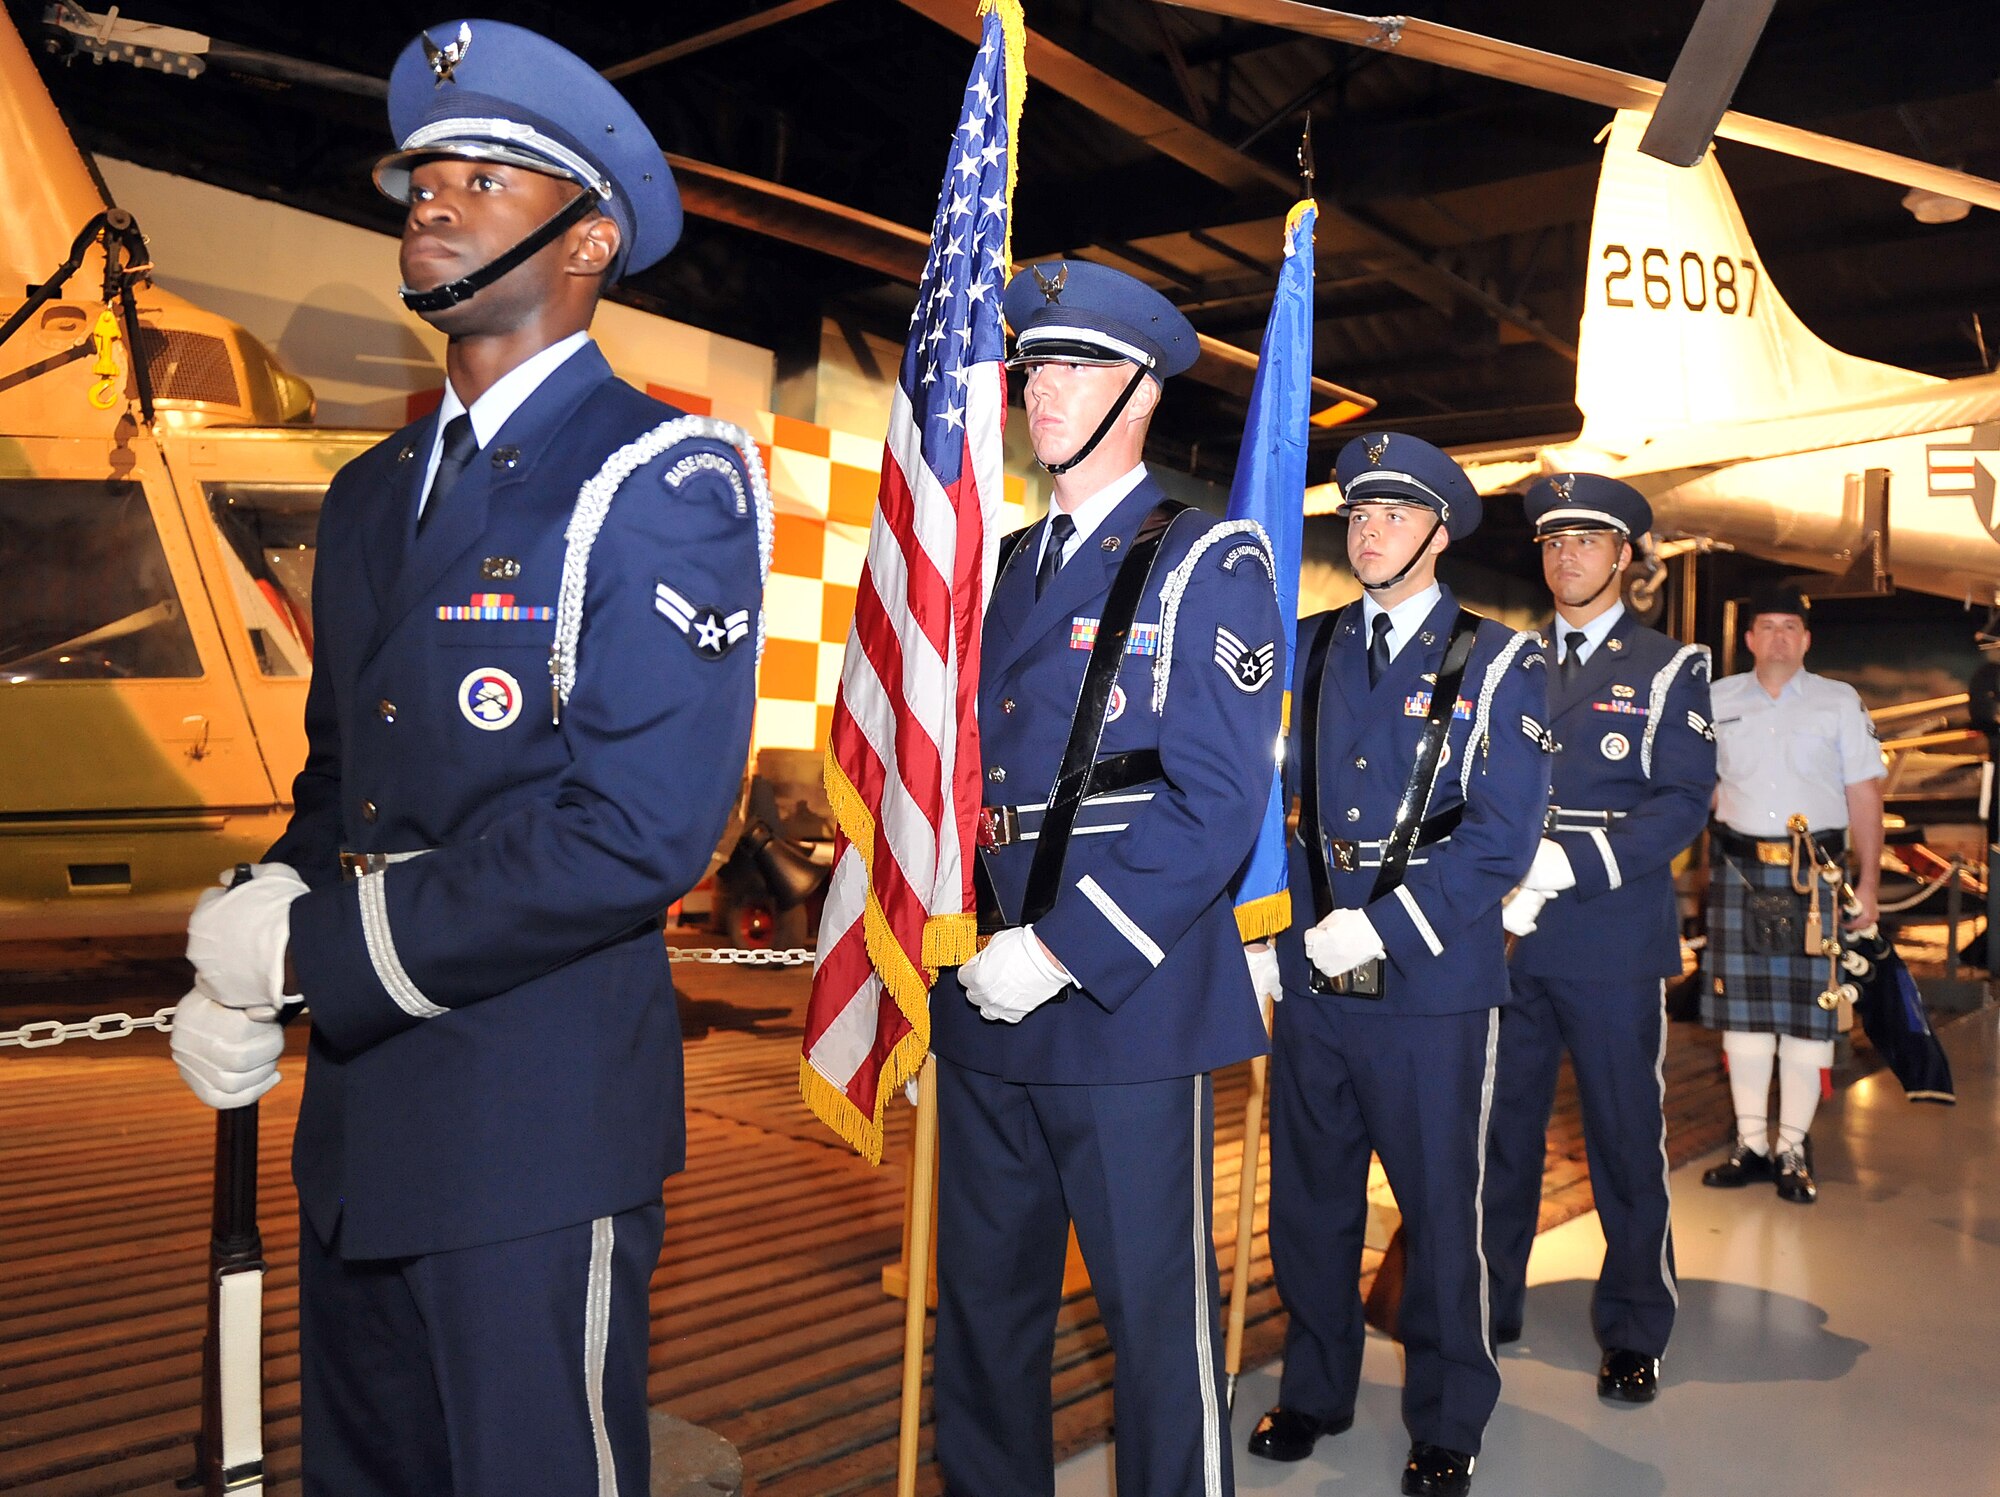 Robins Honor Guard posts the colors atPOW/MIA ceremony Sept. 20 at the Museum of Aviation. (U.S. Air Force photo by Tommie Horton)